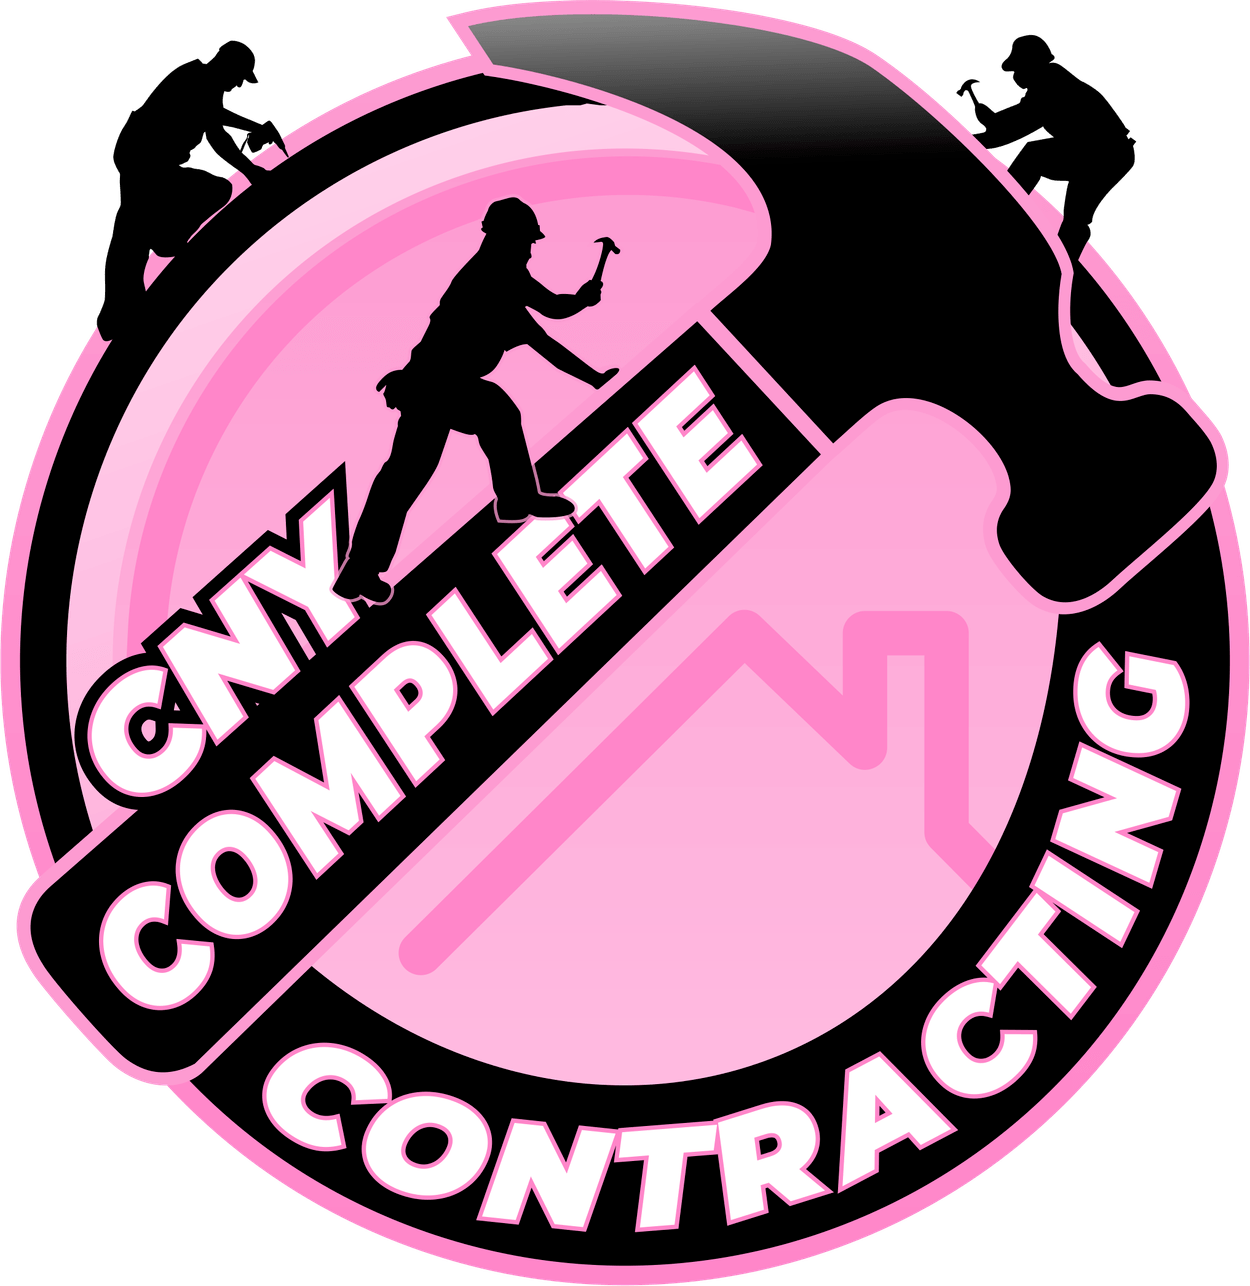 CNY Complete Contracting, LLCLogo